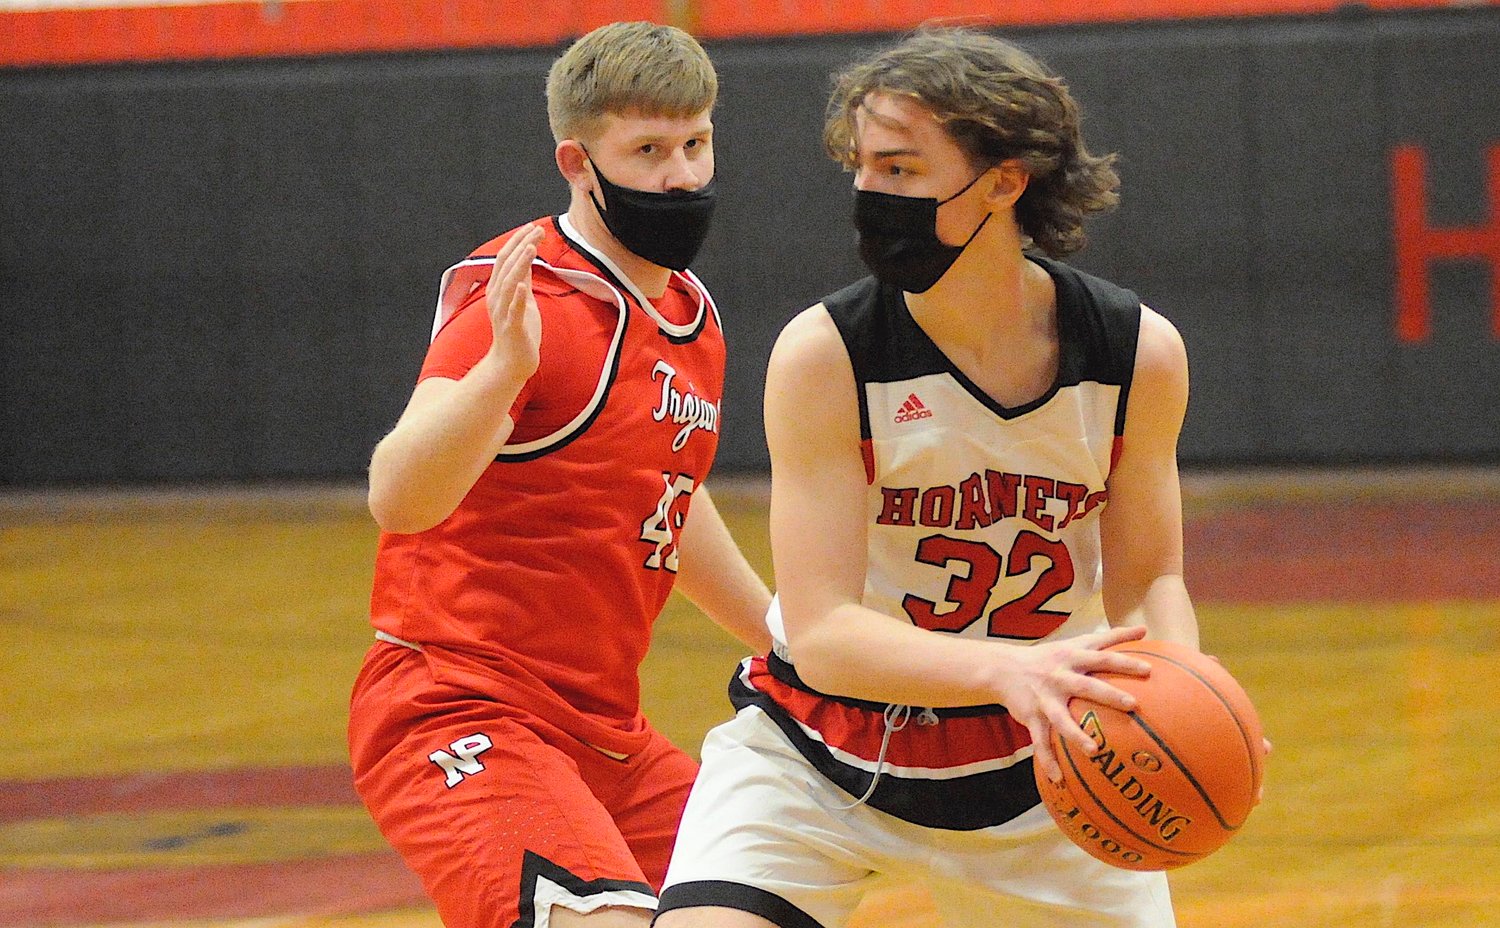 The eyes have it. Honesdale’s Jed McCormick versus North Pocano’s Ty LaFave.